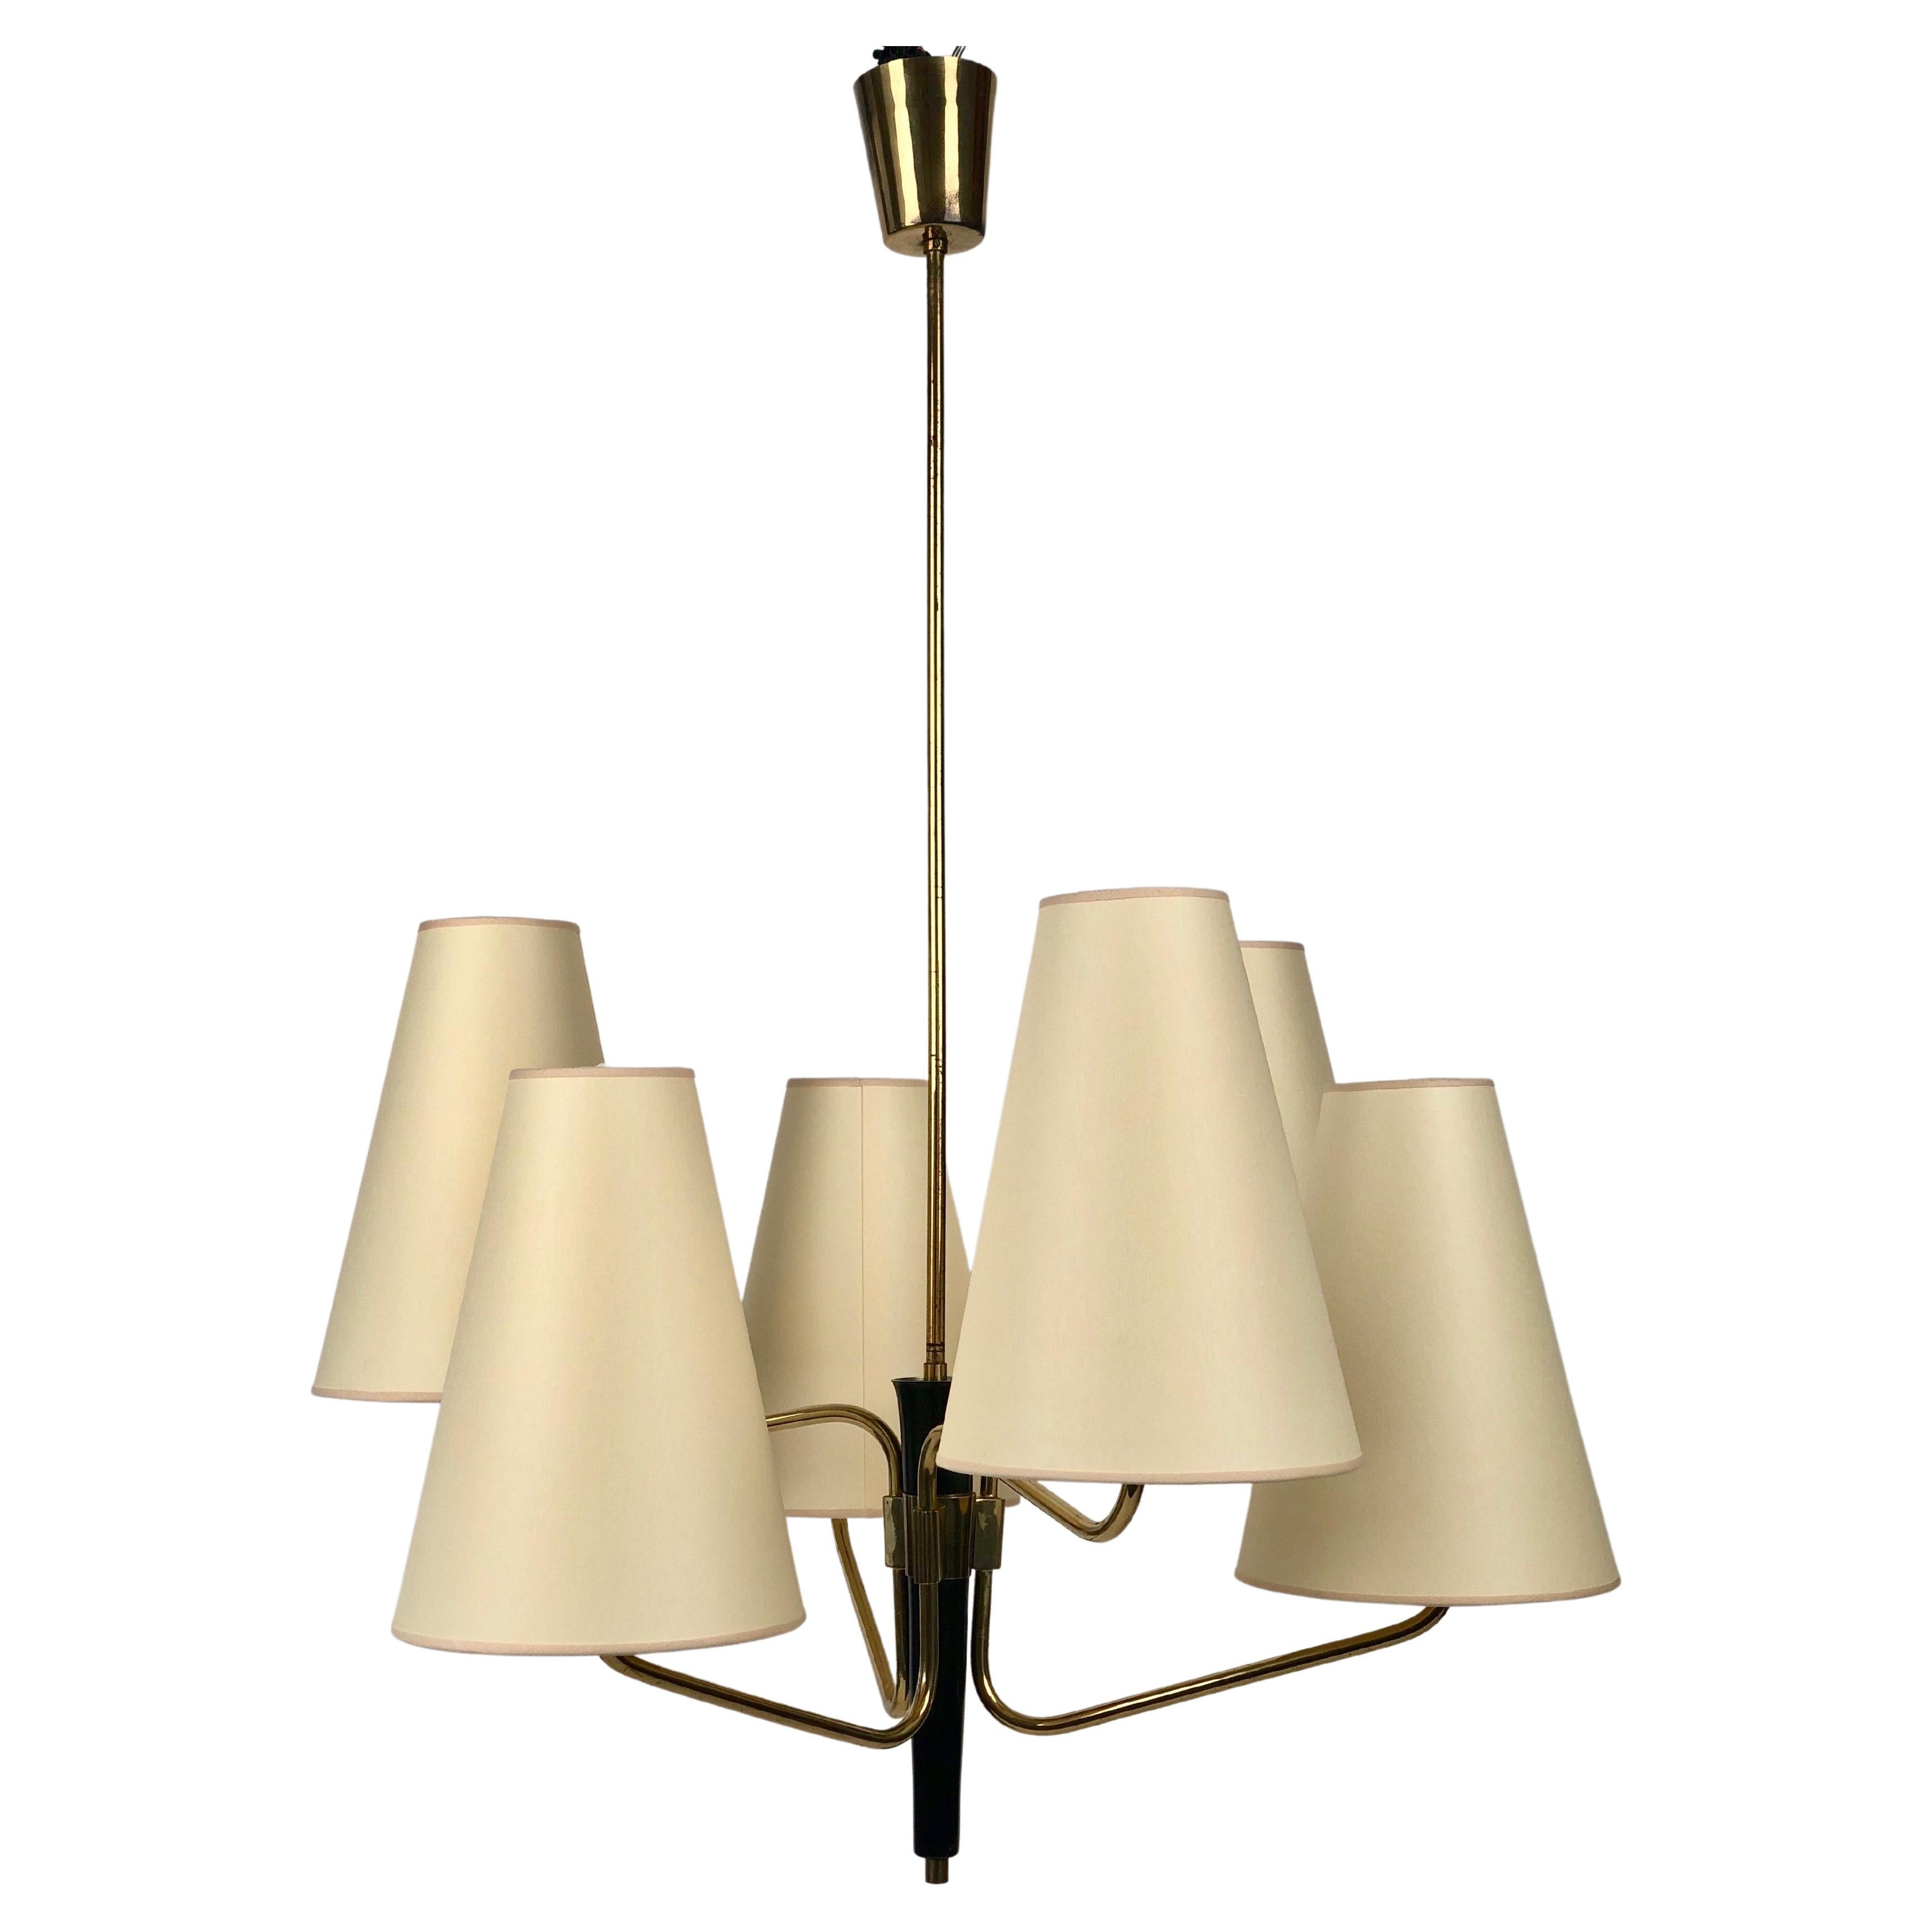 Midcentury Pendant Lamp in Brass from Rupert Nikoll, Austria with 6 Silk Shades For Sale